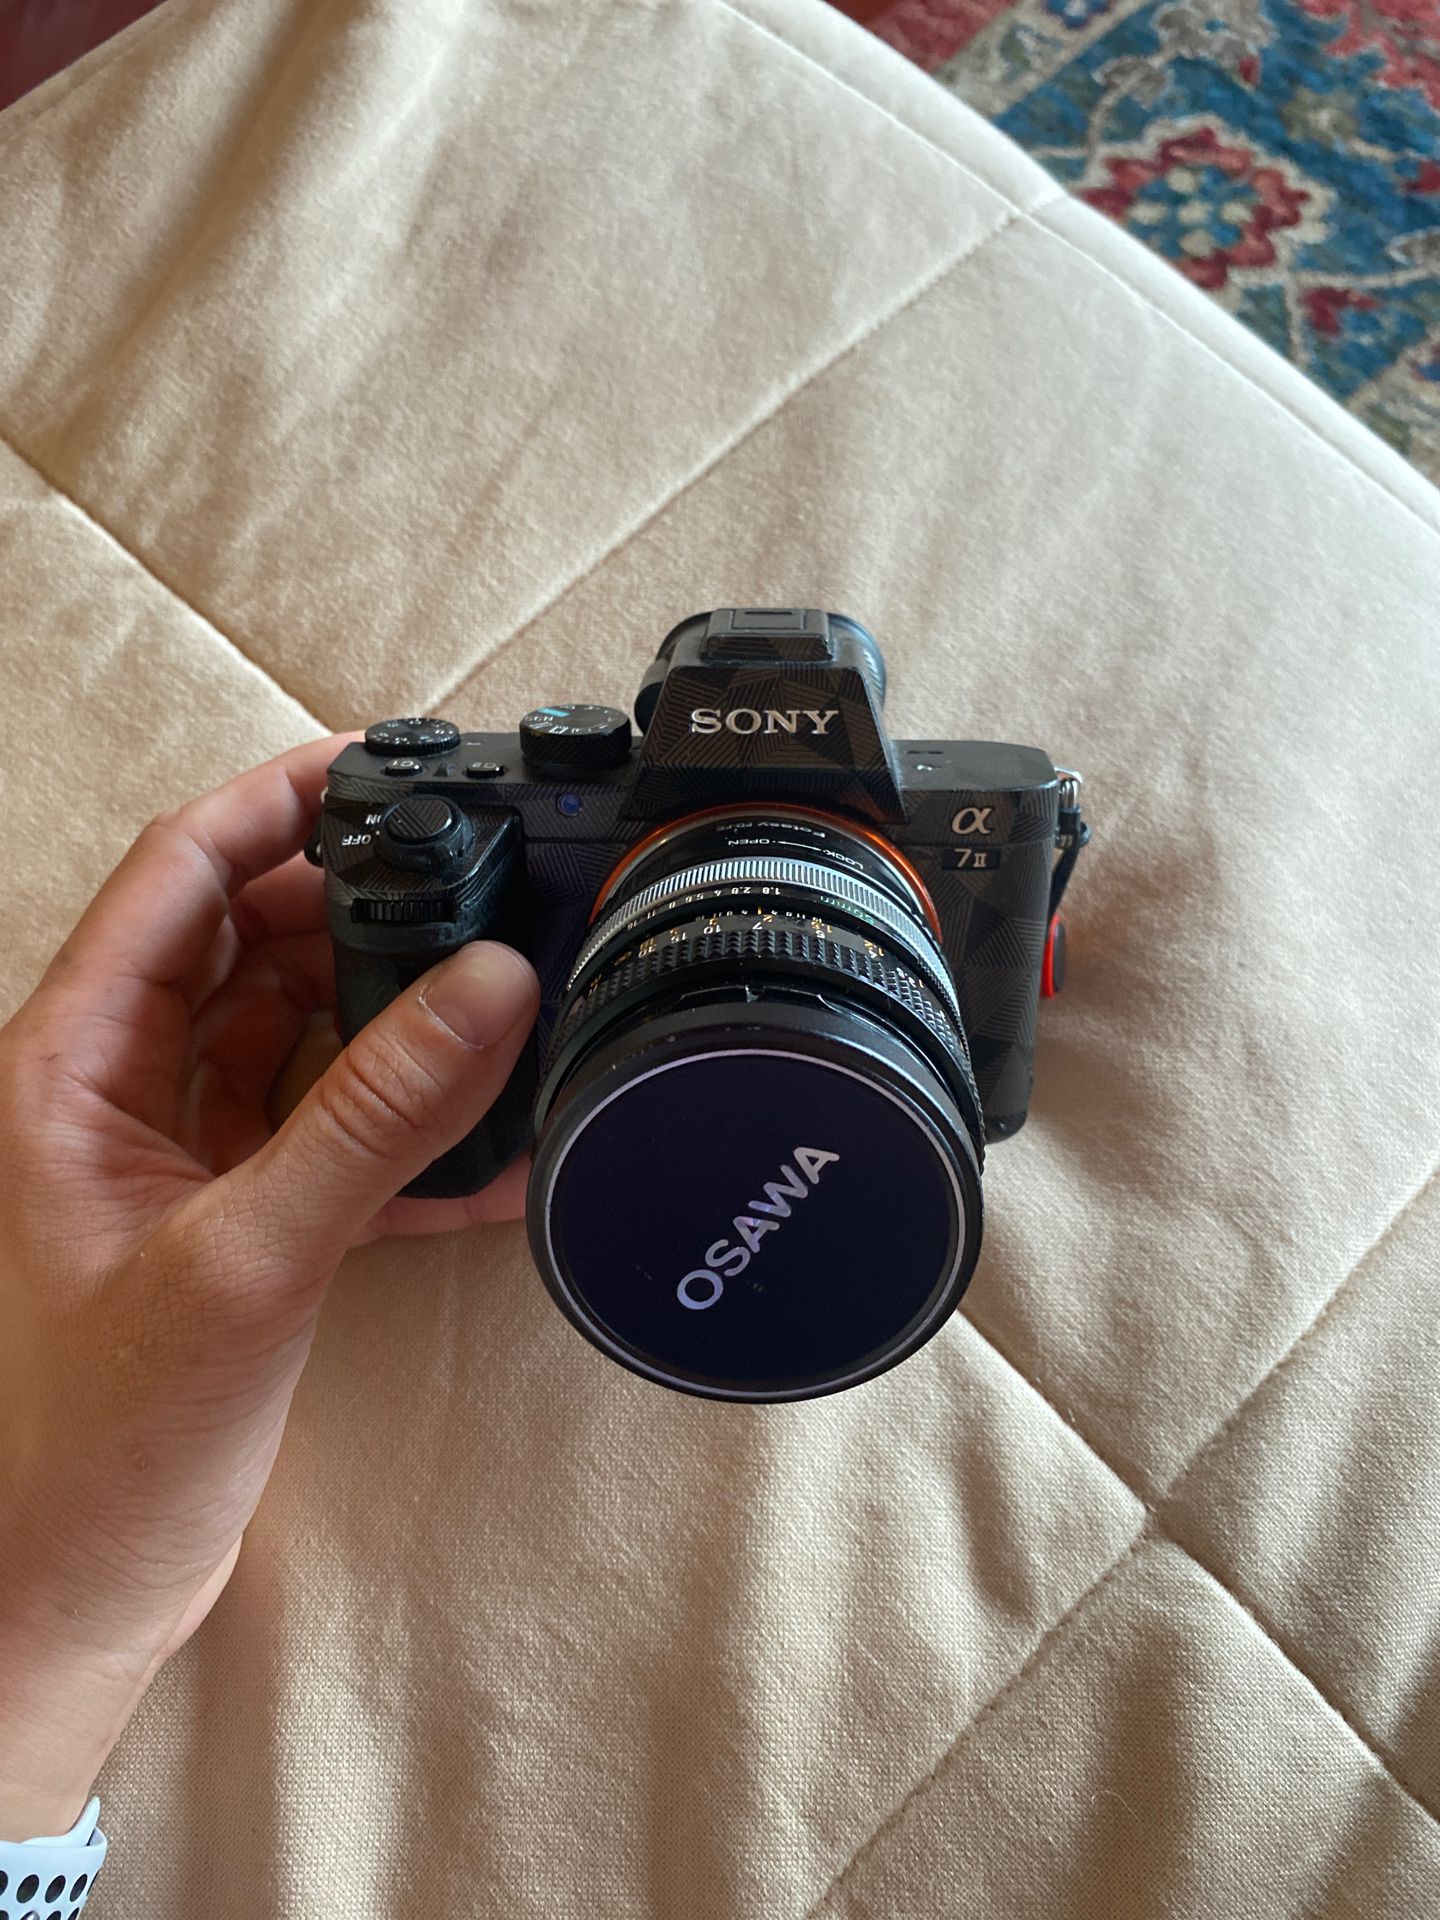 Sony A7II with Canon 50mm FD lense